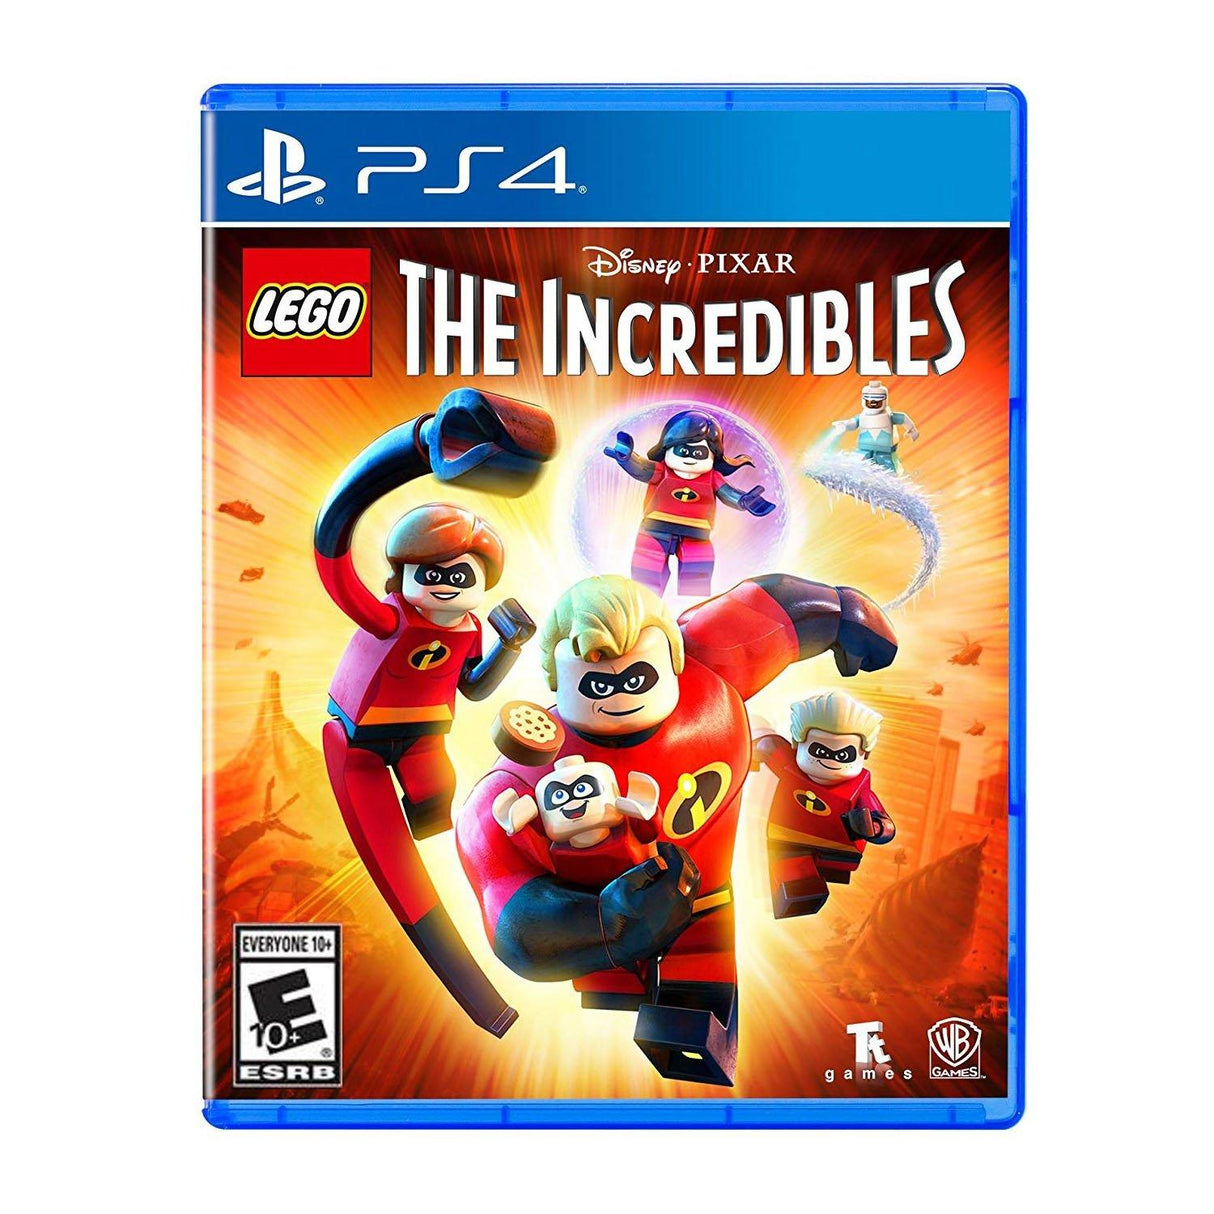 Lego The Incredibles For PlayStation 4 "Region 1" - Level UpWB GamesPlaystation Video Games883929633012